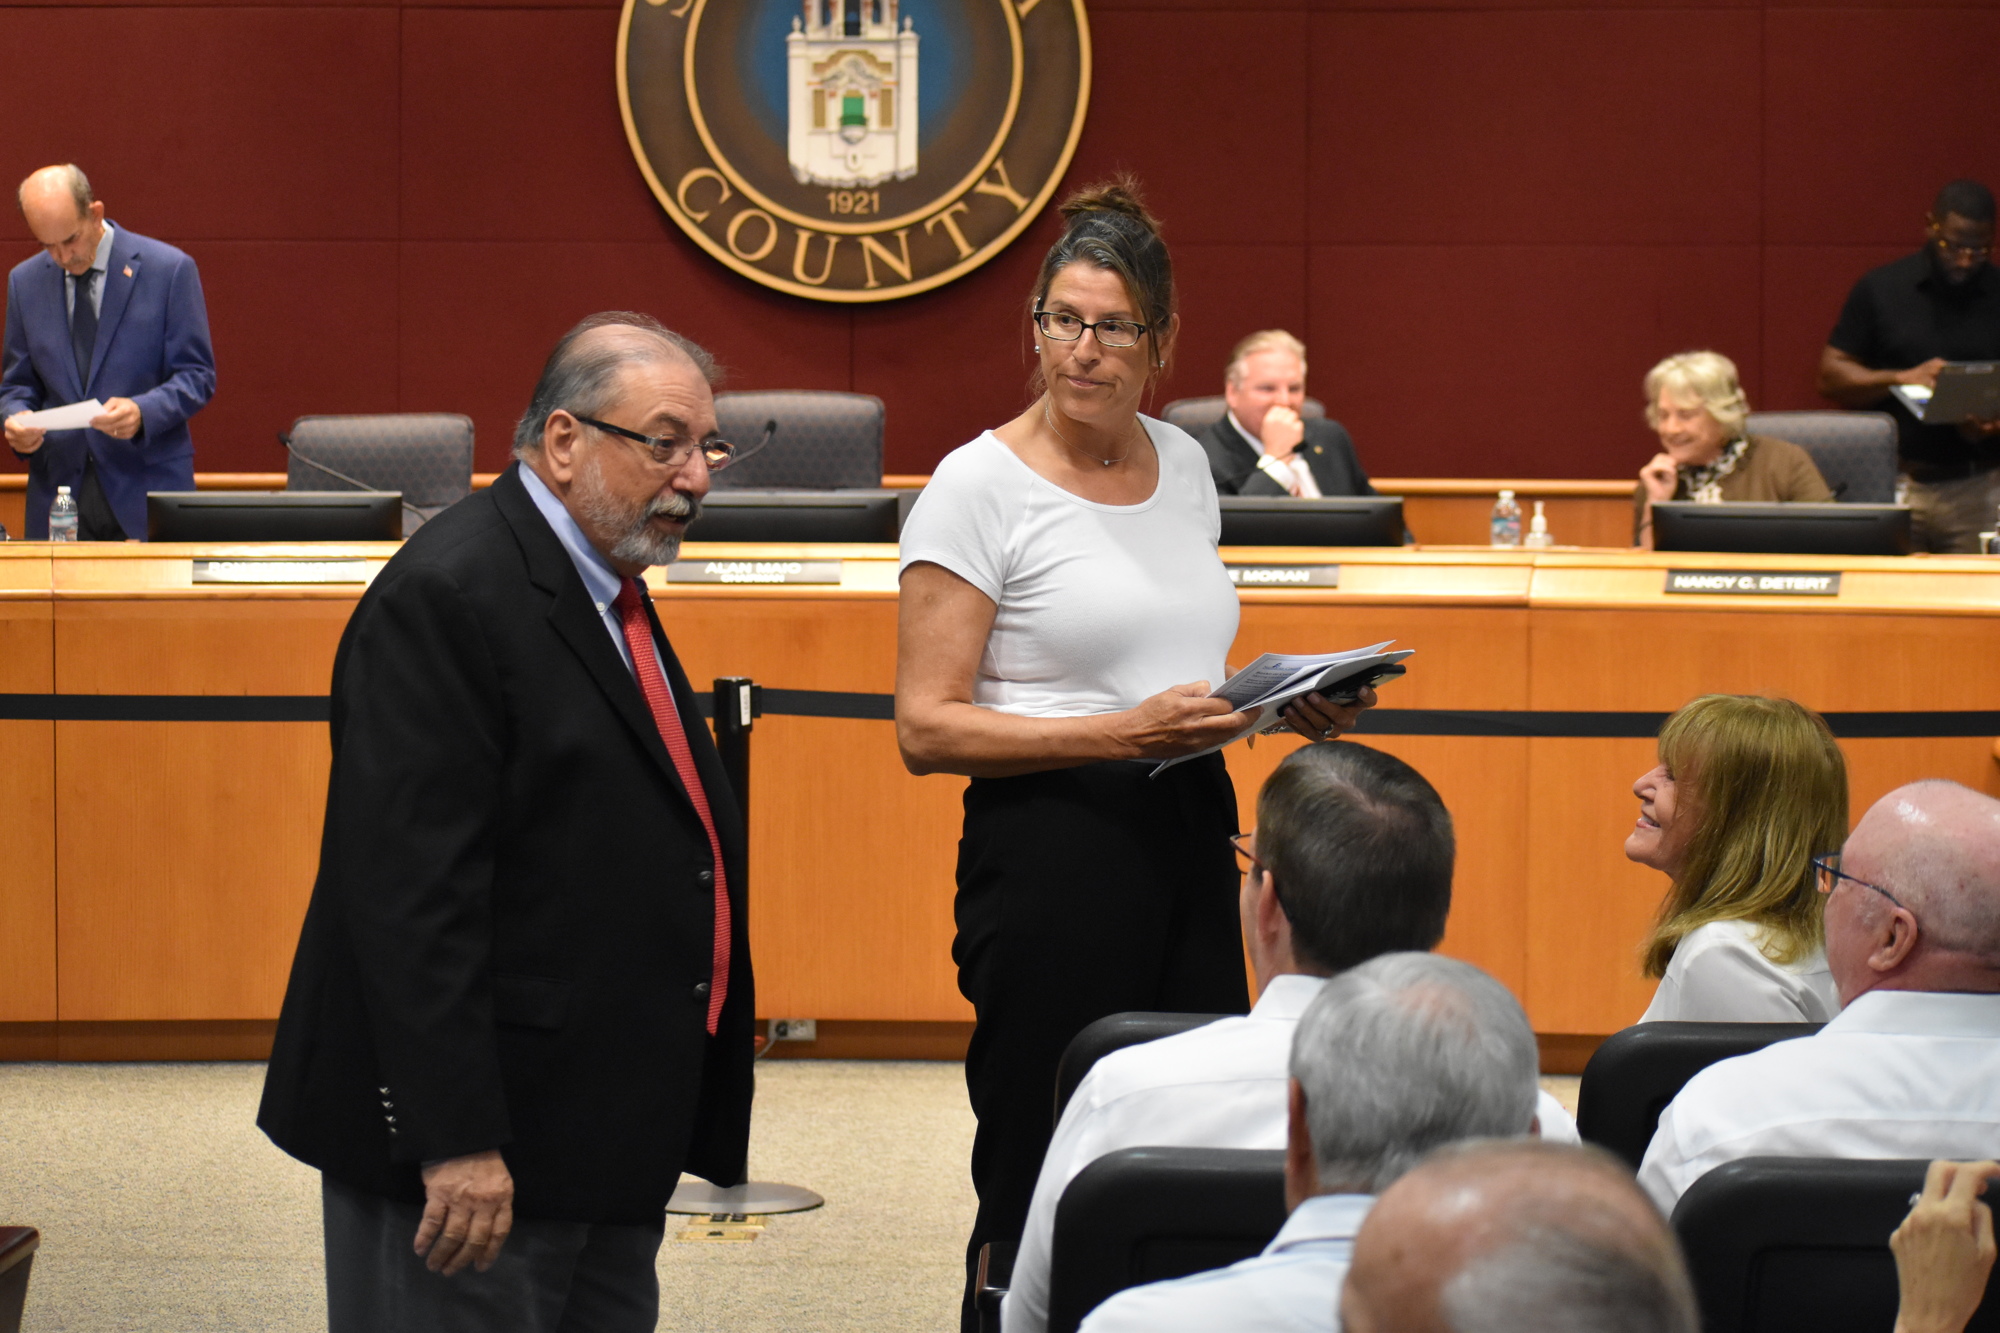 Commission Chair Alan Maio interacts with the crowd, including Waterside's Maureen Weihs, before the commission meeting began Tuesday. (Photo by Ian Swaby)